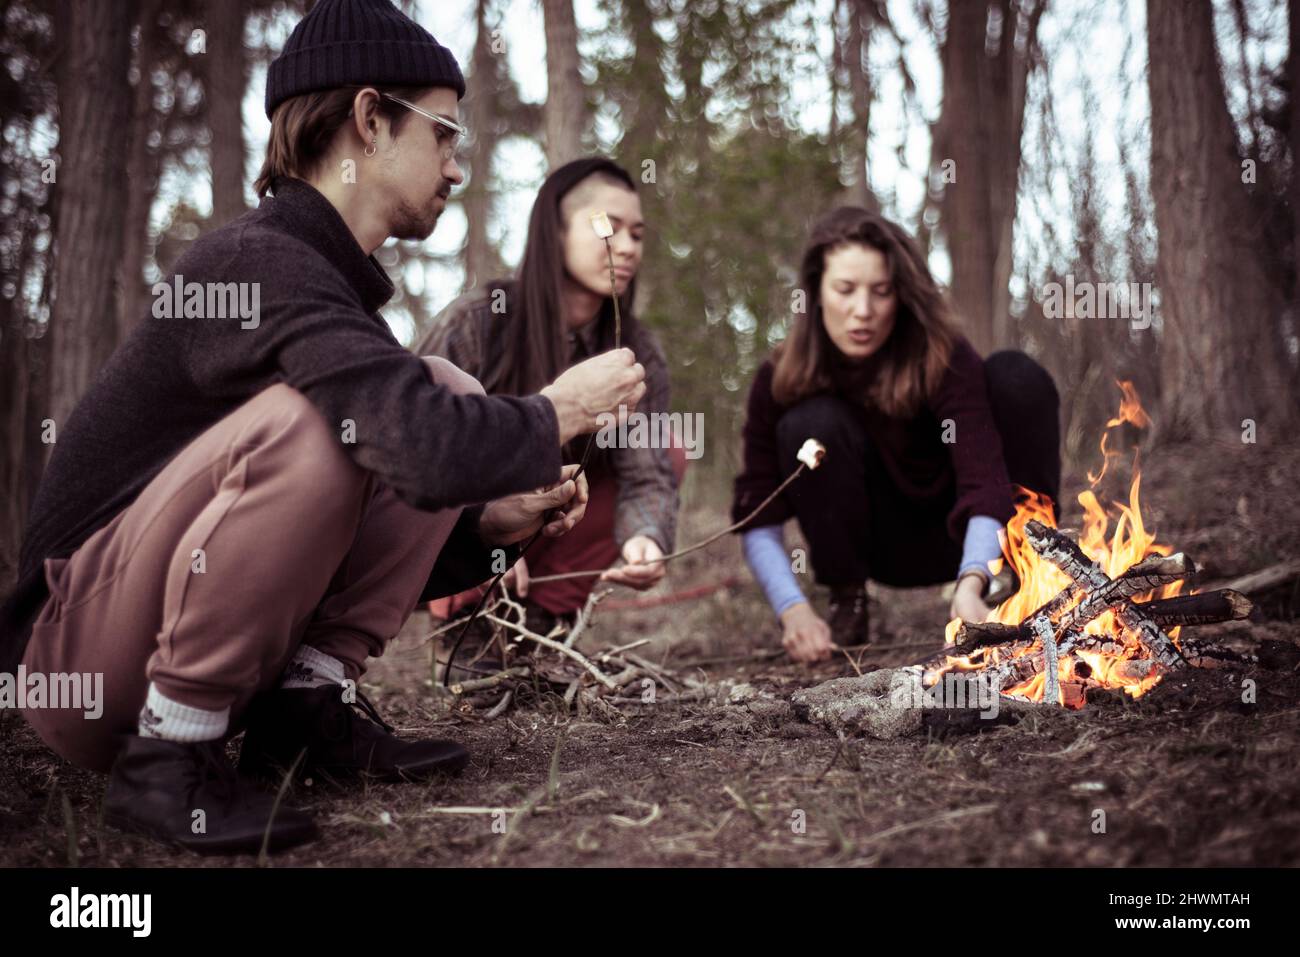 alternative friends gather and squat to roast marshmallows by fire Stock Photo